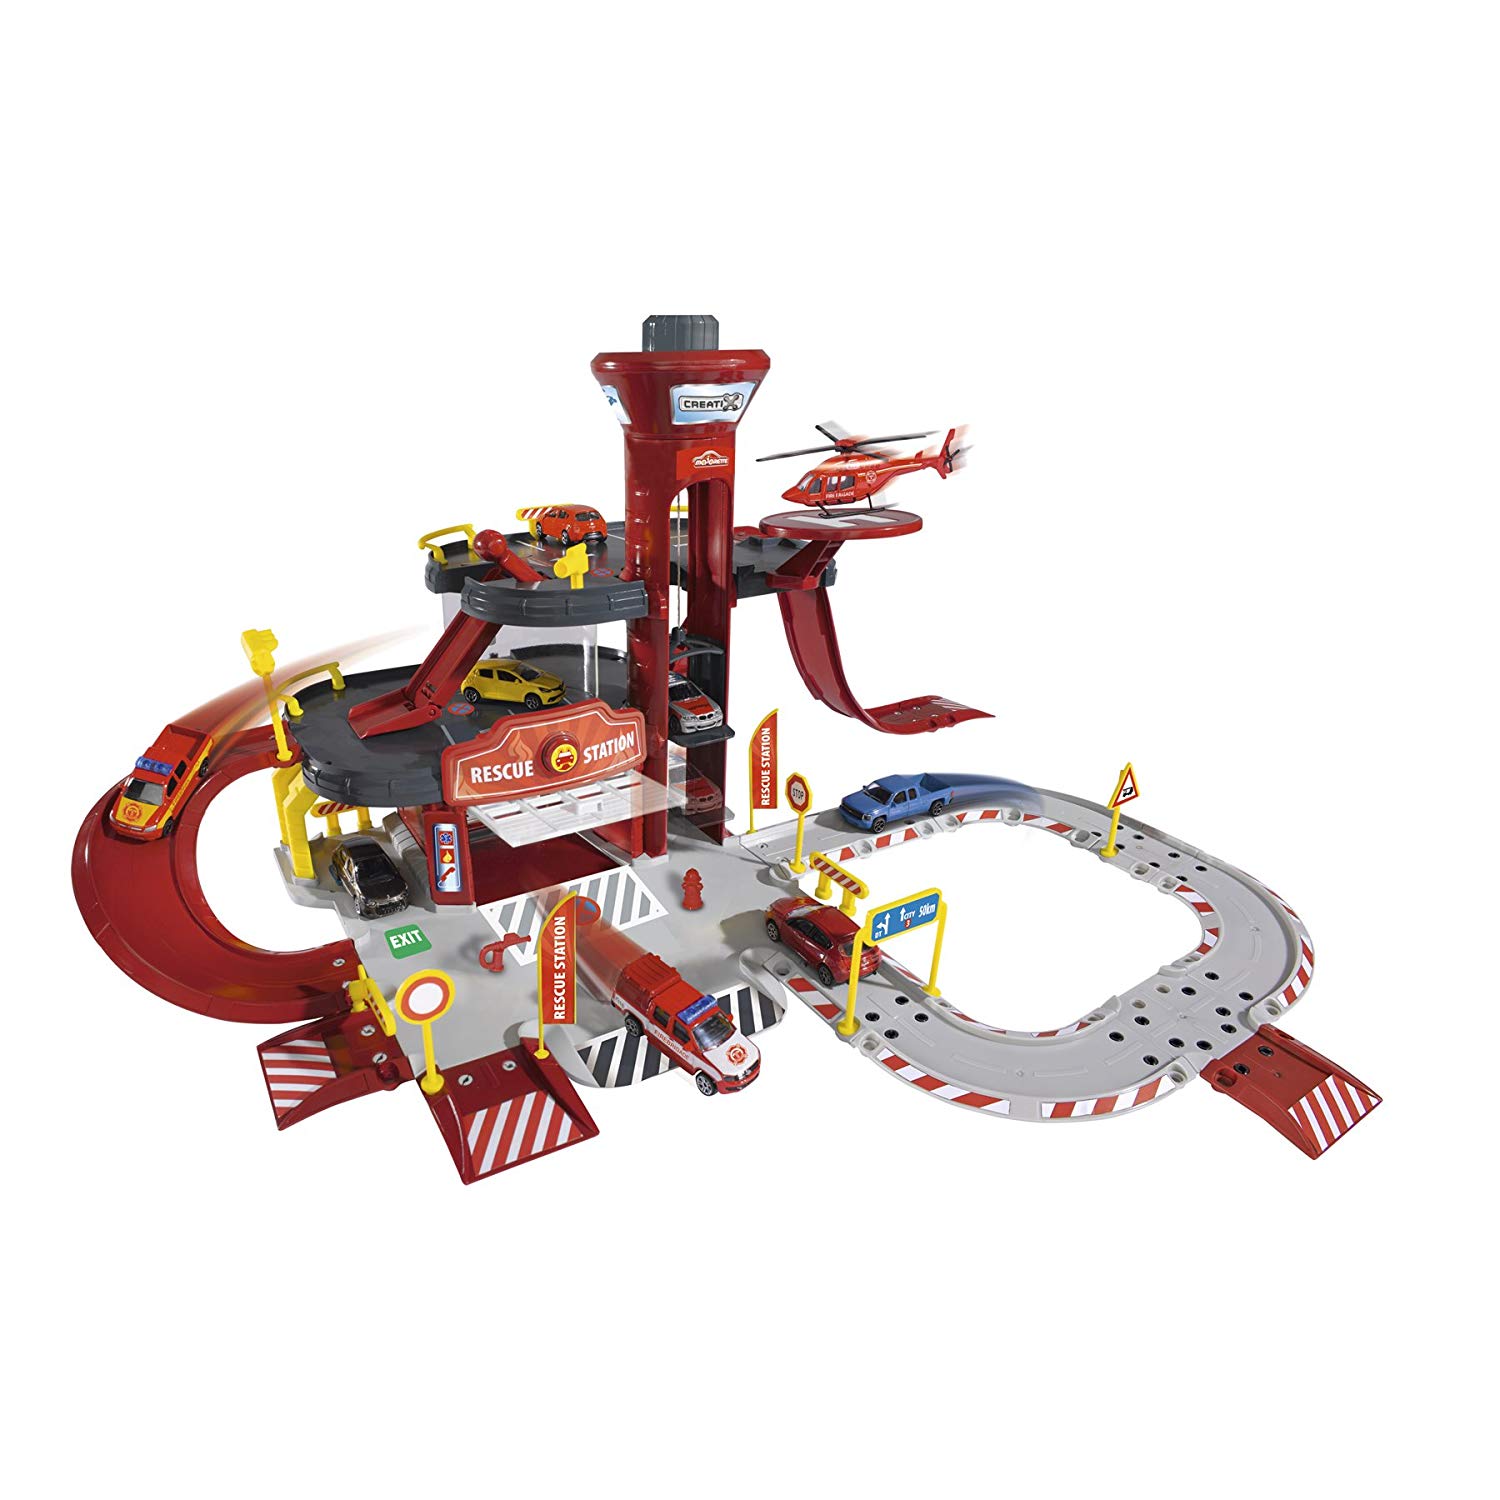 Majorette 212050019 Creatix Rescue Station Play Set With Large Garage And 5